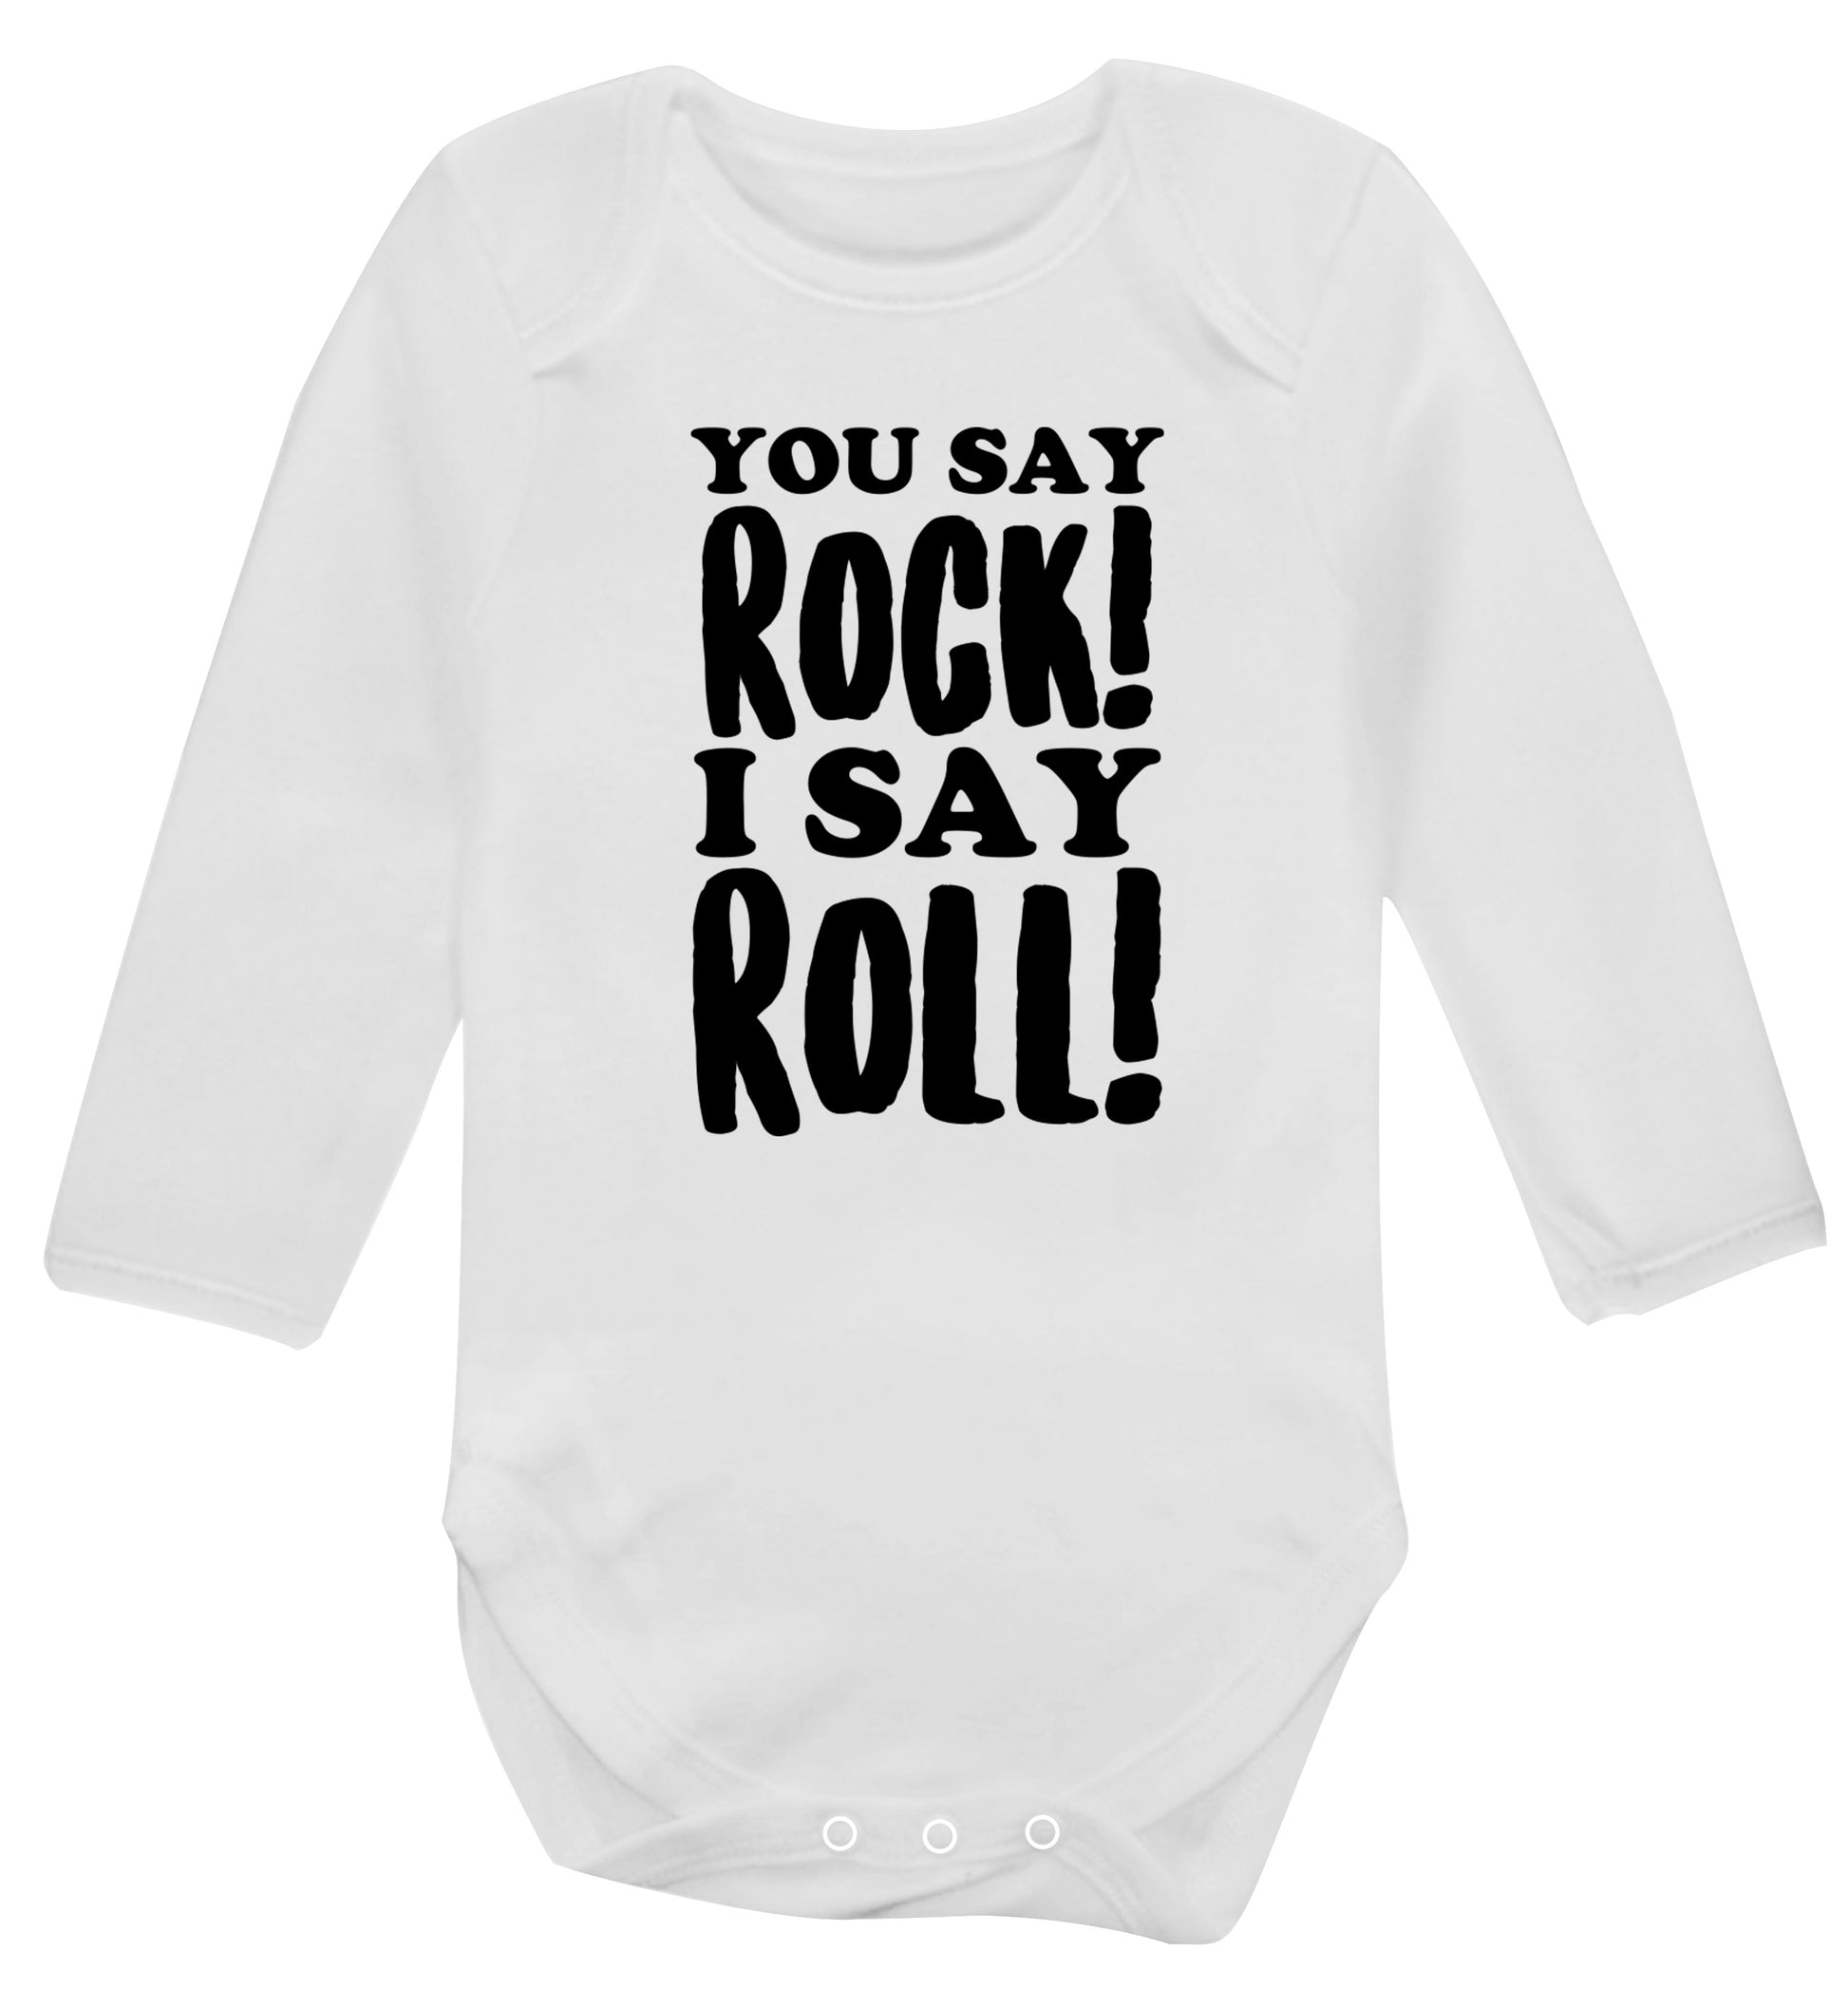 You say rock I say roll! Baby Vest long sleeved white 6-12 months